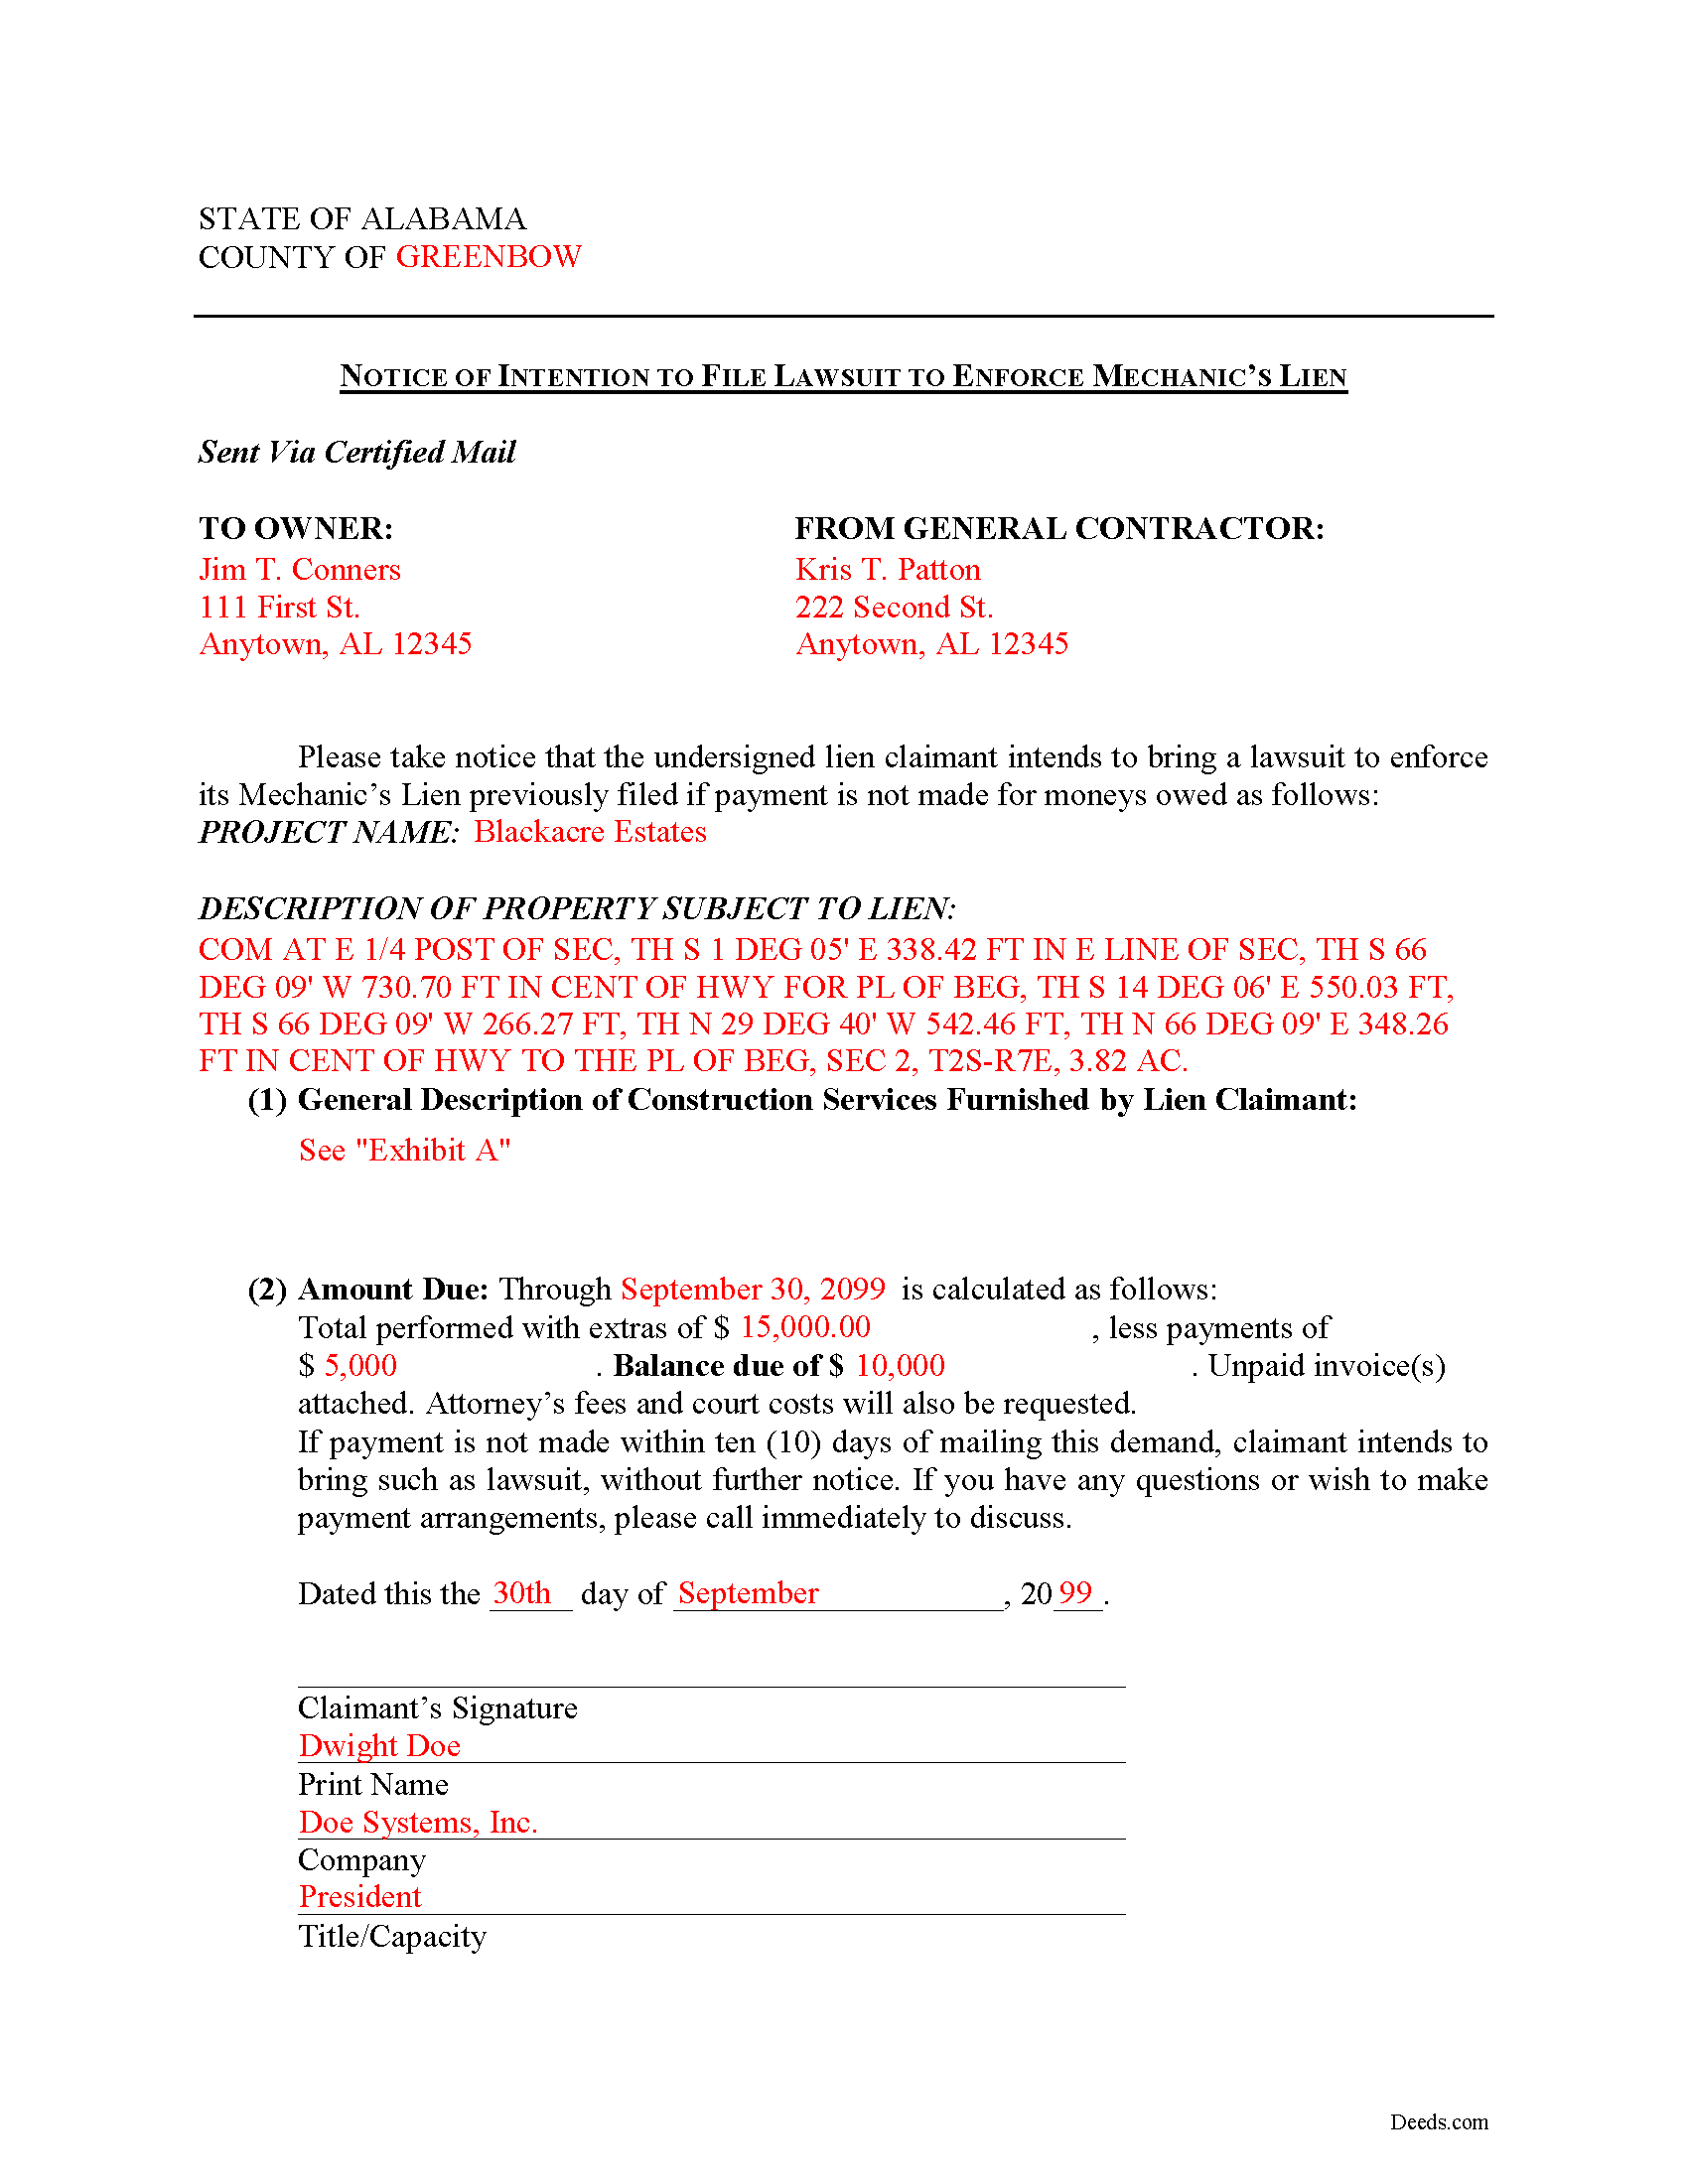 Completed Example of the Full Price Lien Notice Document